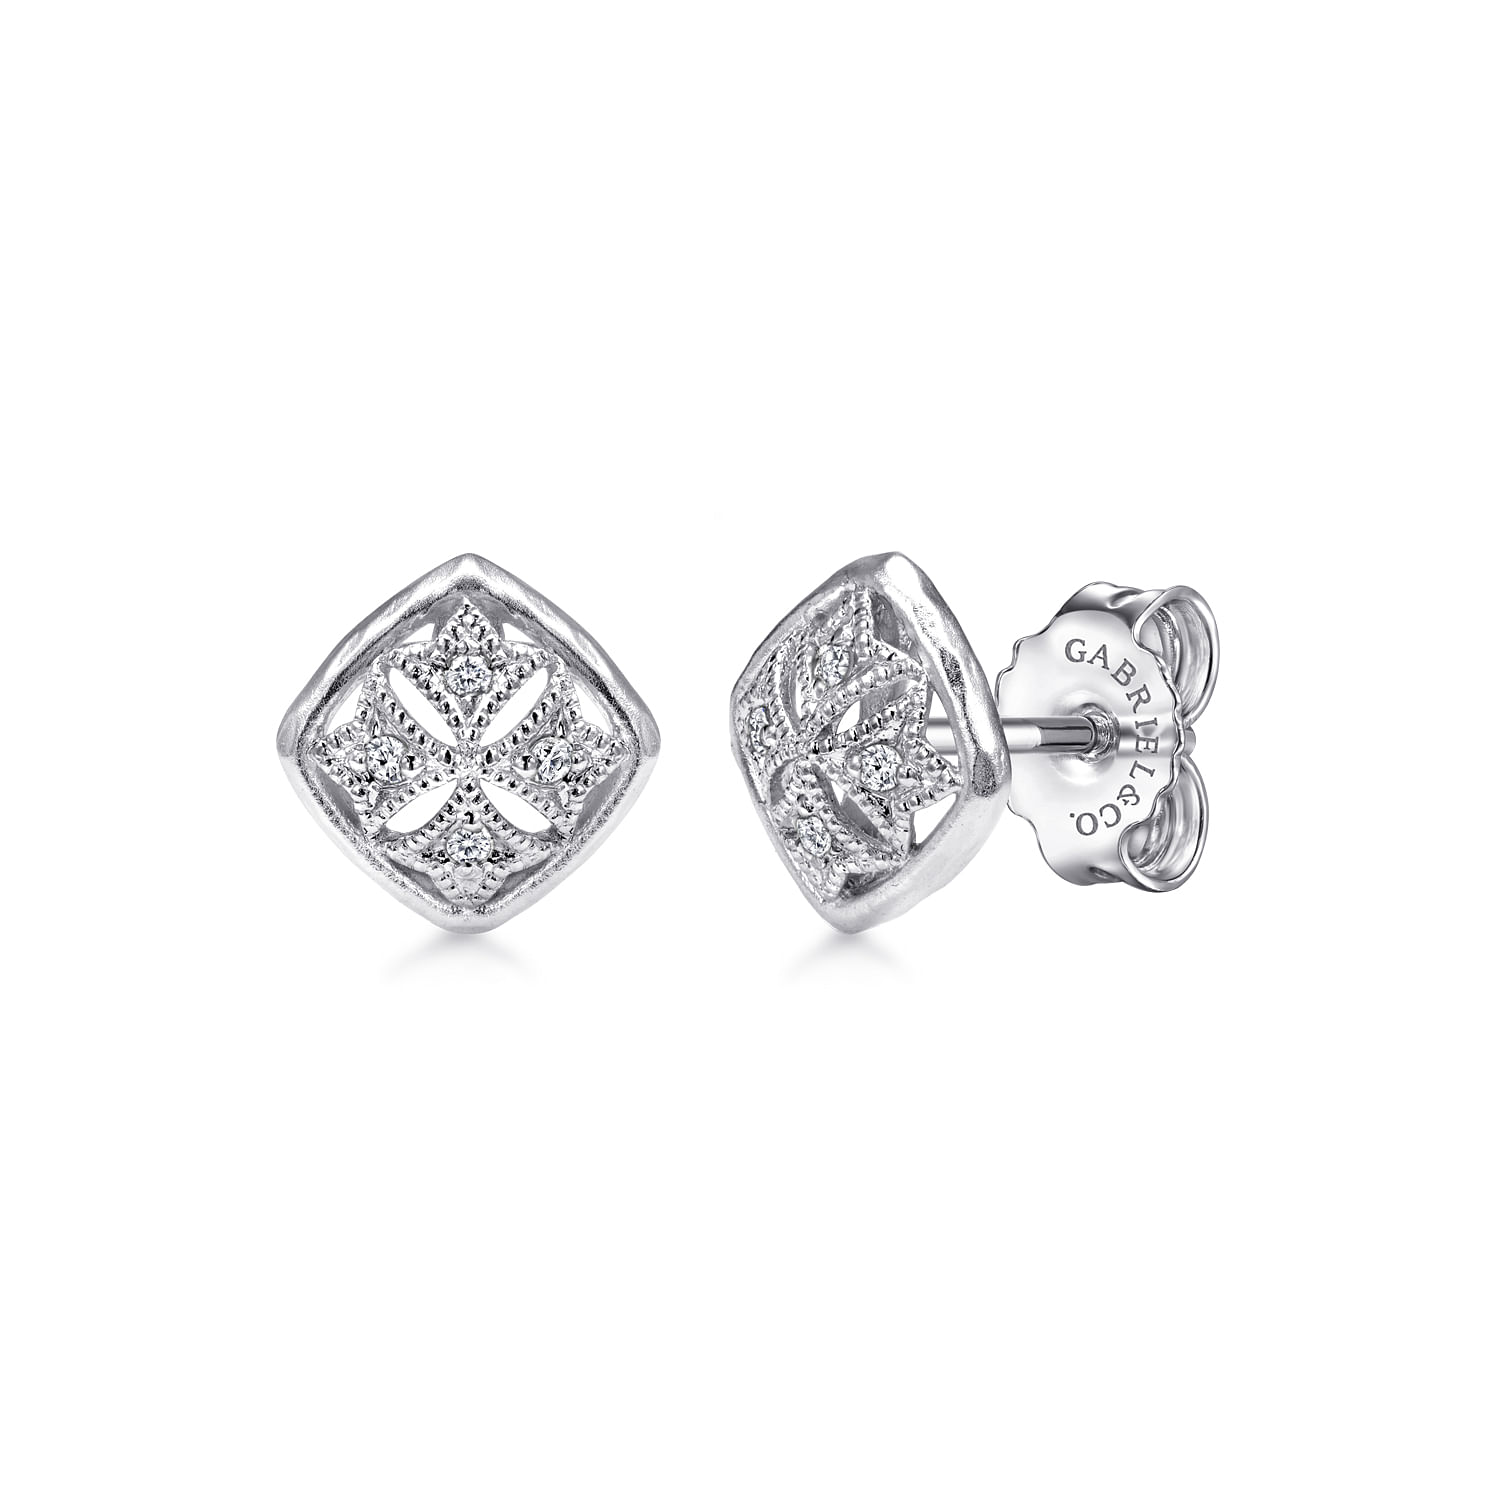 925 Sterling Silver Openwork Stud Earrings with Diamond Accents